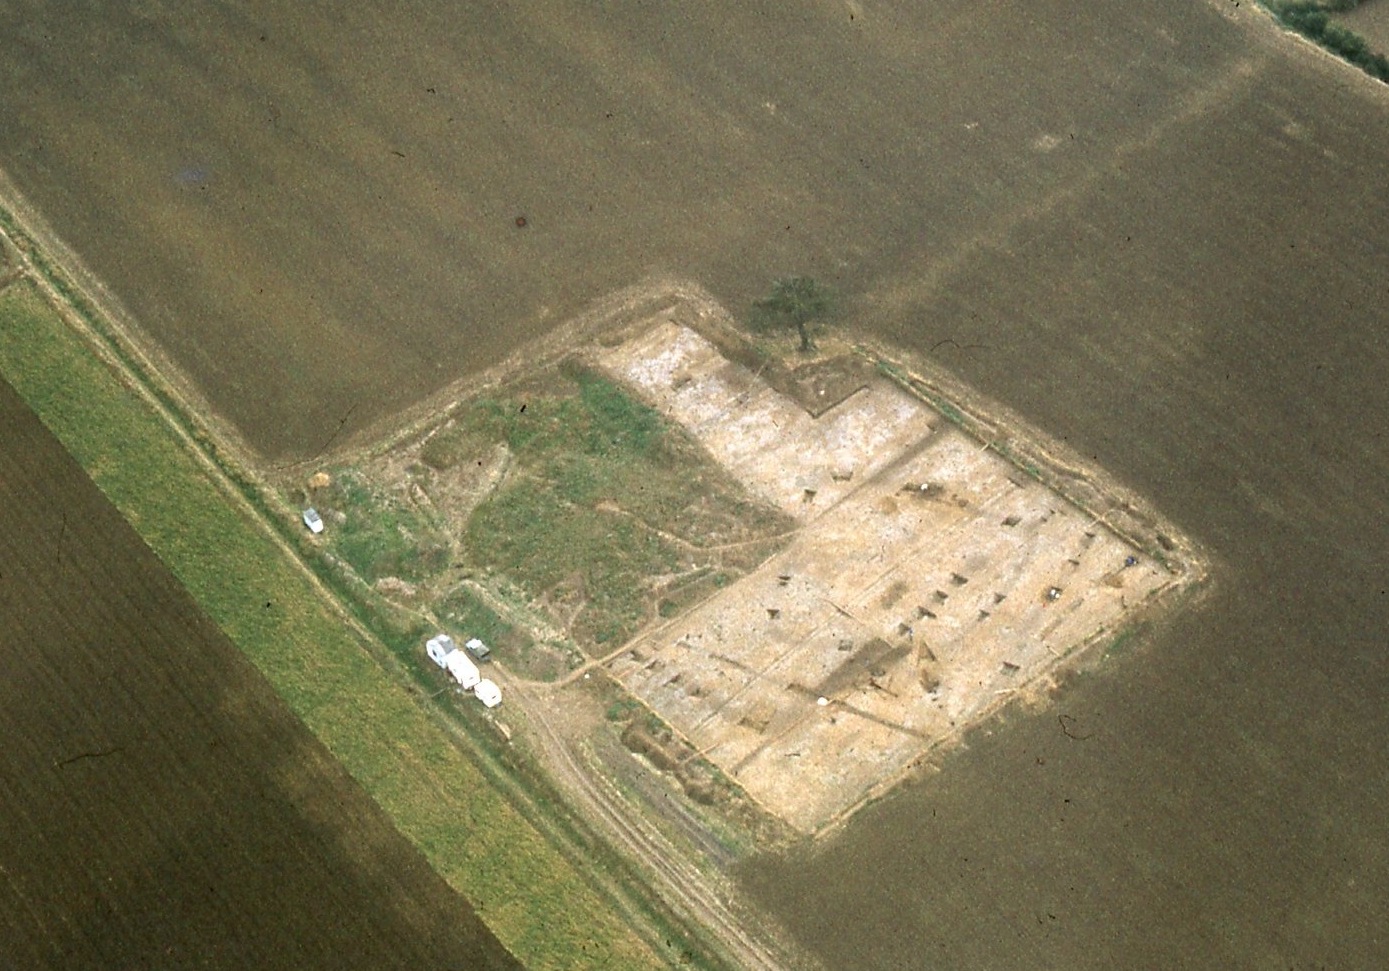 1978 excavation, the 1977 investigation area is used as a spoil heap